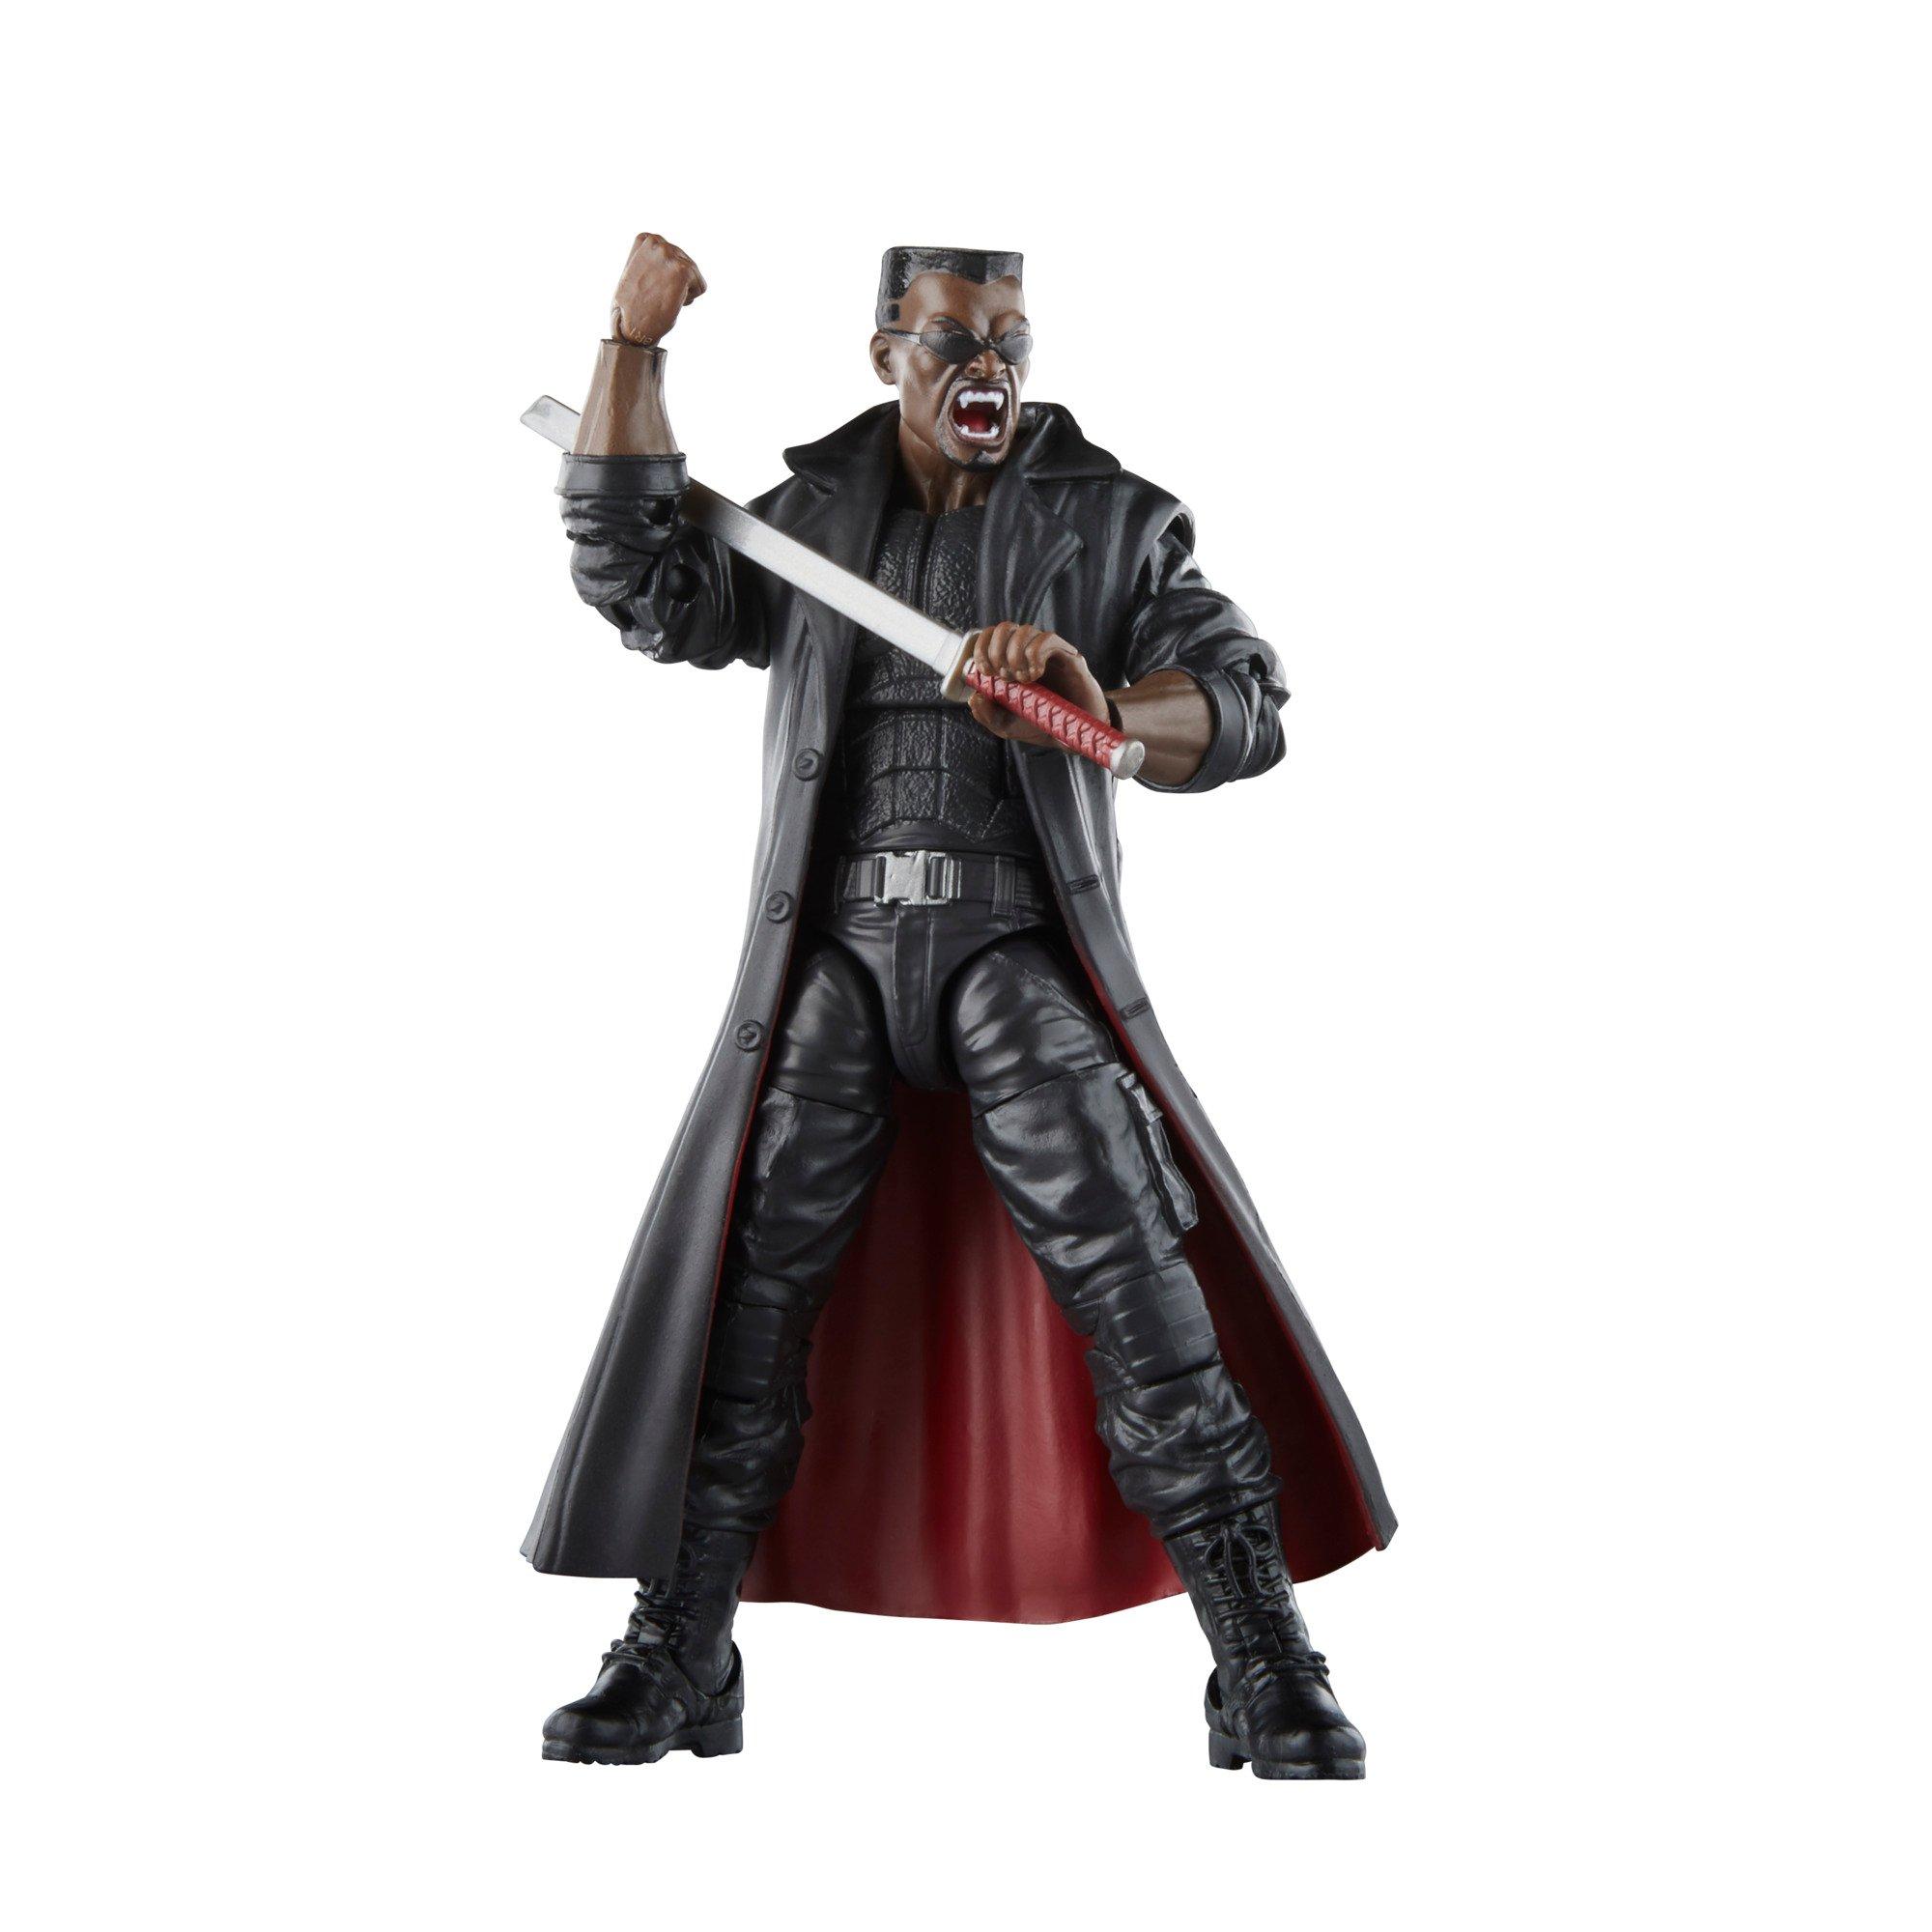 Hasbro Marvel Legends Series Marvel Knights Marvel's Blade 6-in Action  Figure (Build A Figure - Mindless One)